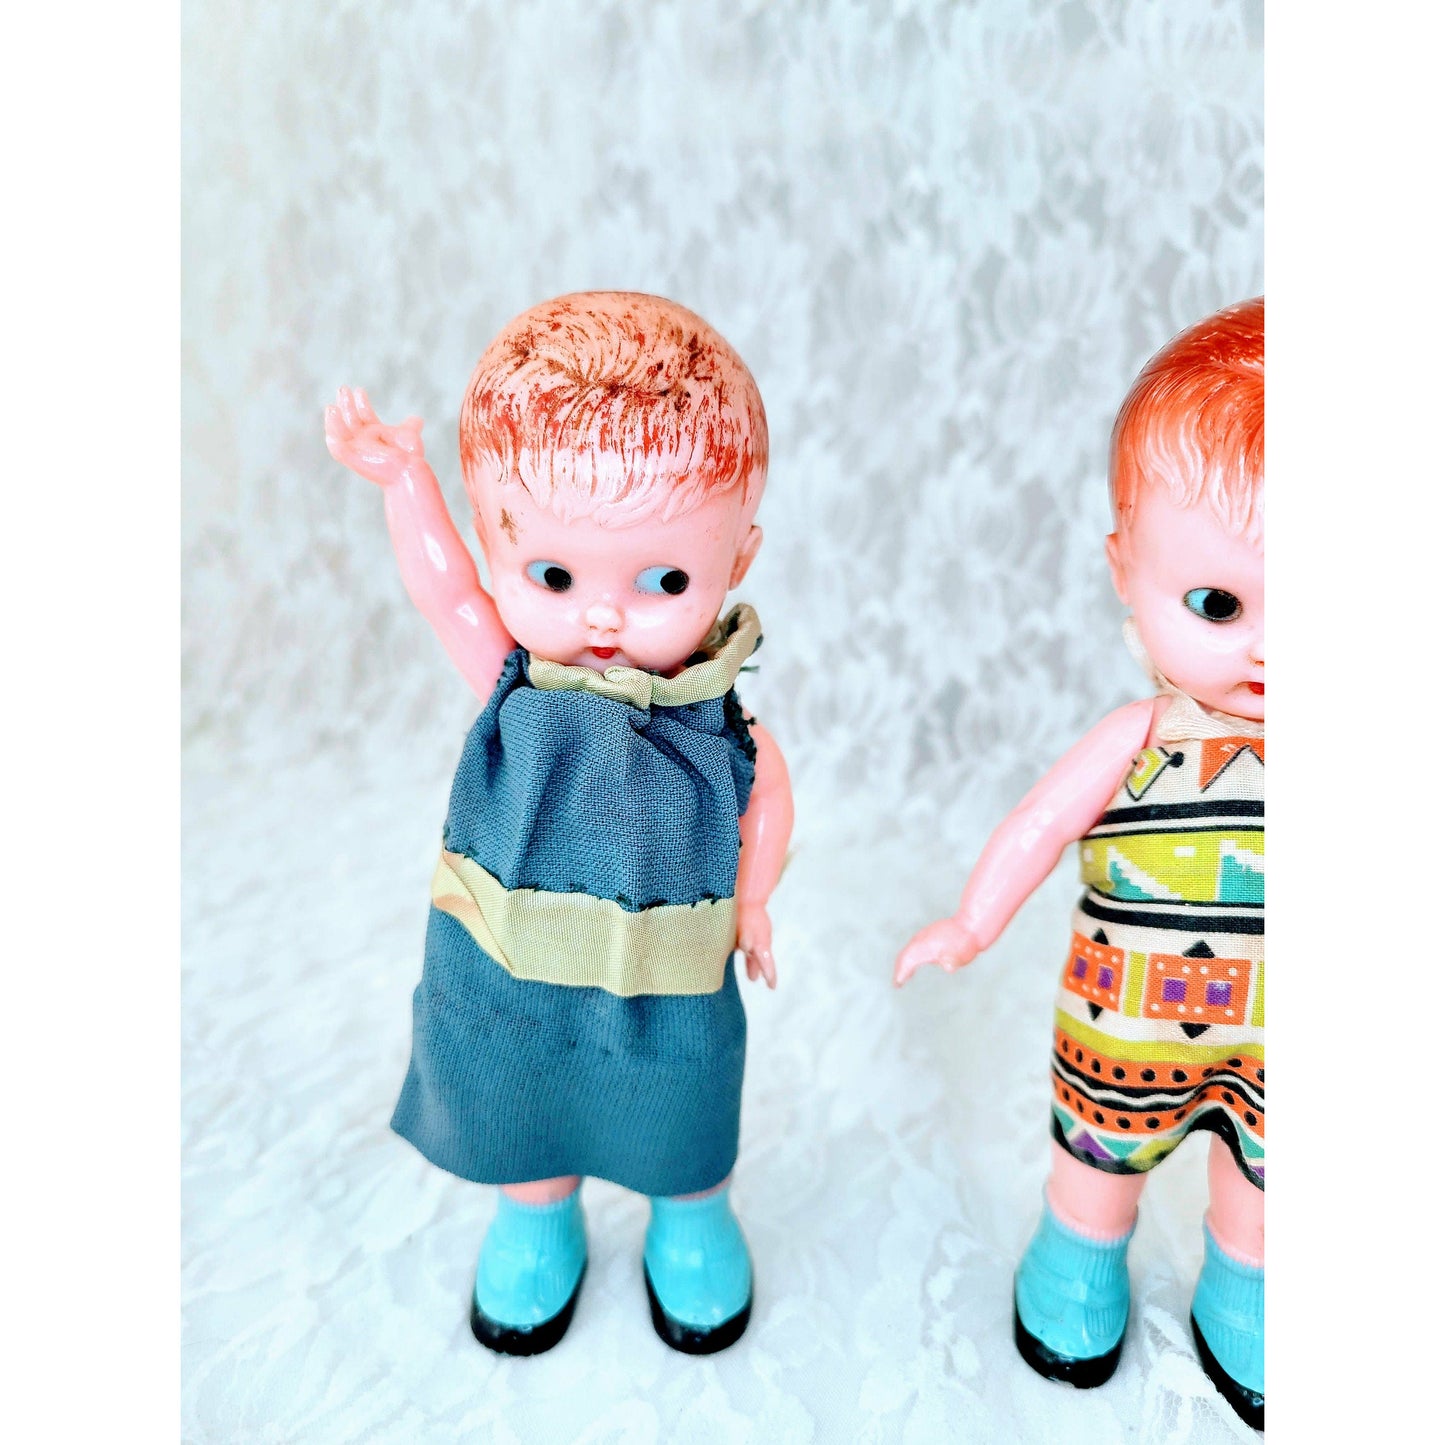 Rare! Set of Two (2) Celluloid 1950s Vintage 6" Kewpie Doll RATTLES ~ Jointed Arms ~ Fixed Legs ~ Moving Arms ~ ORIGINAL Clothing